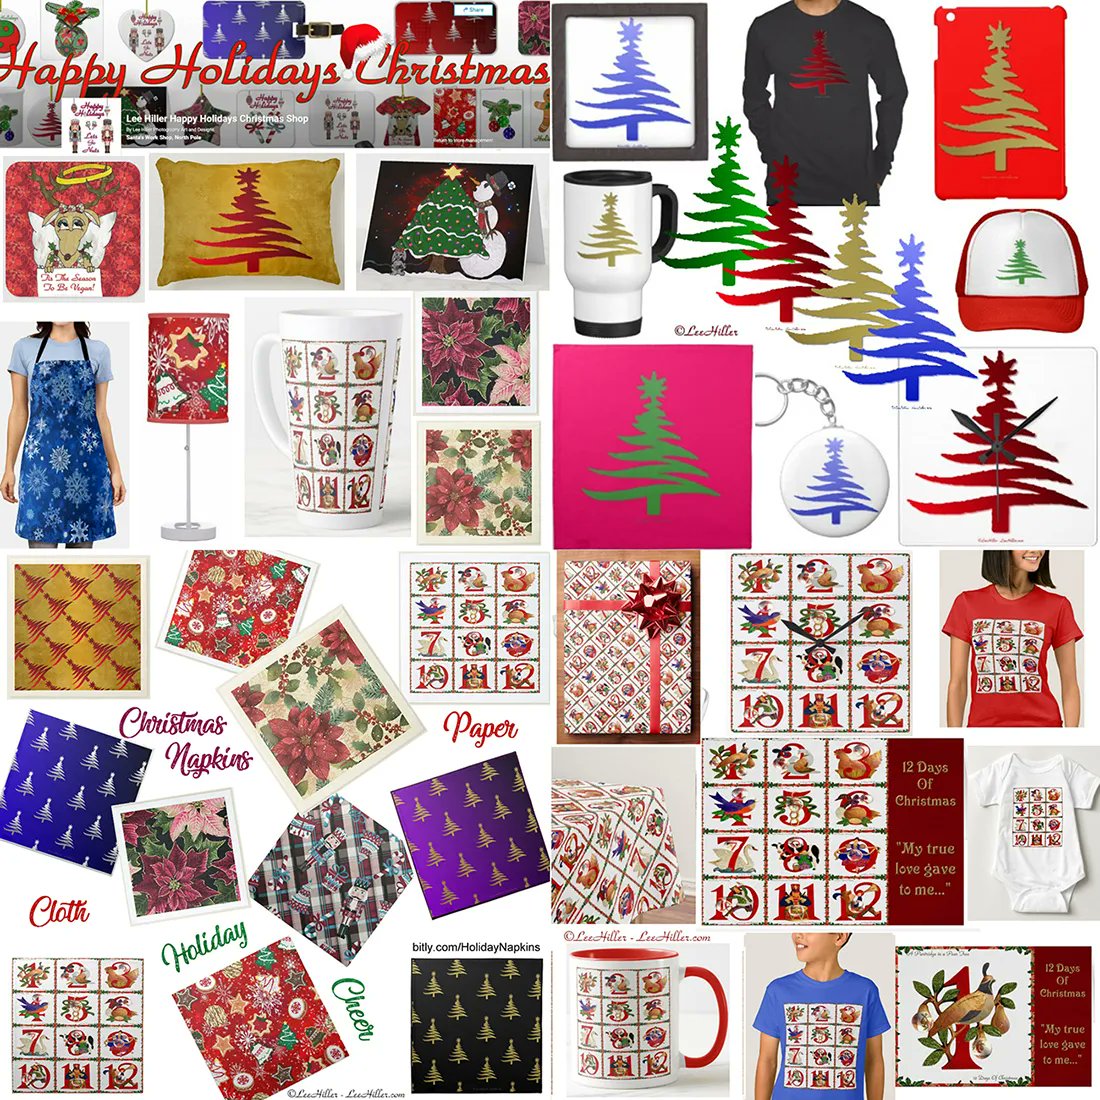 🎁#sale🎁
25%OFF EVERYTHING w/ #code MAY23WEEKEND ends05/29
buff.ly/3NuLmAh

🌟🎄🎁🎄🎁🎄🌟
#Christmas #12DaysOfChristmas #ChristmasTree #snowflake #Nutcracker #poinsettia #Gingerbread #holidaycheer #Christmas2023 #holidaydecor #gifts #giftideas #scapbooking #crafting